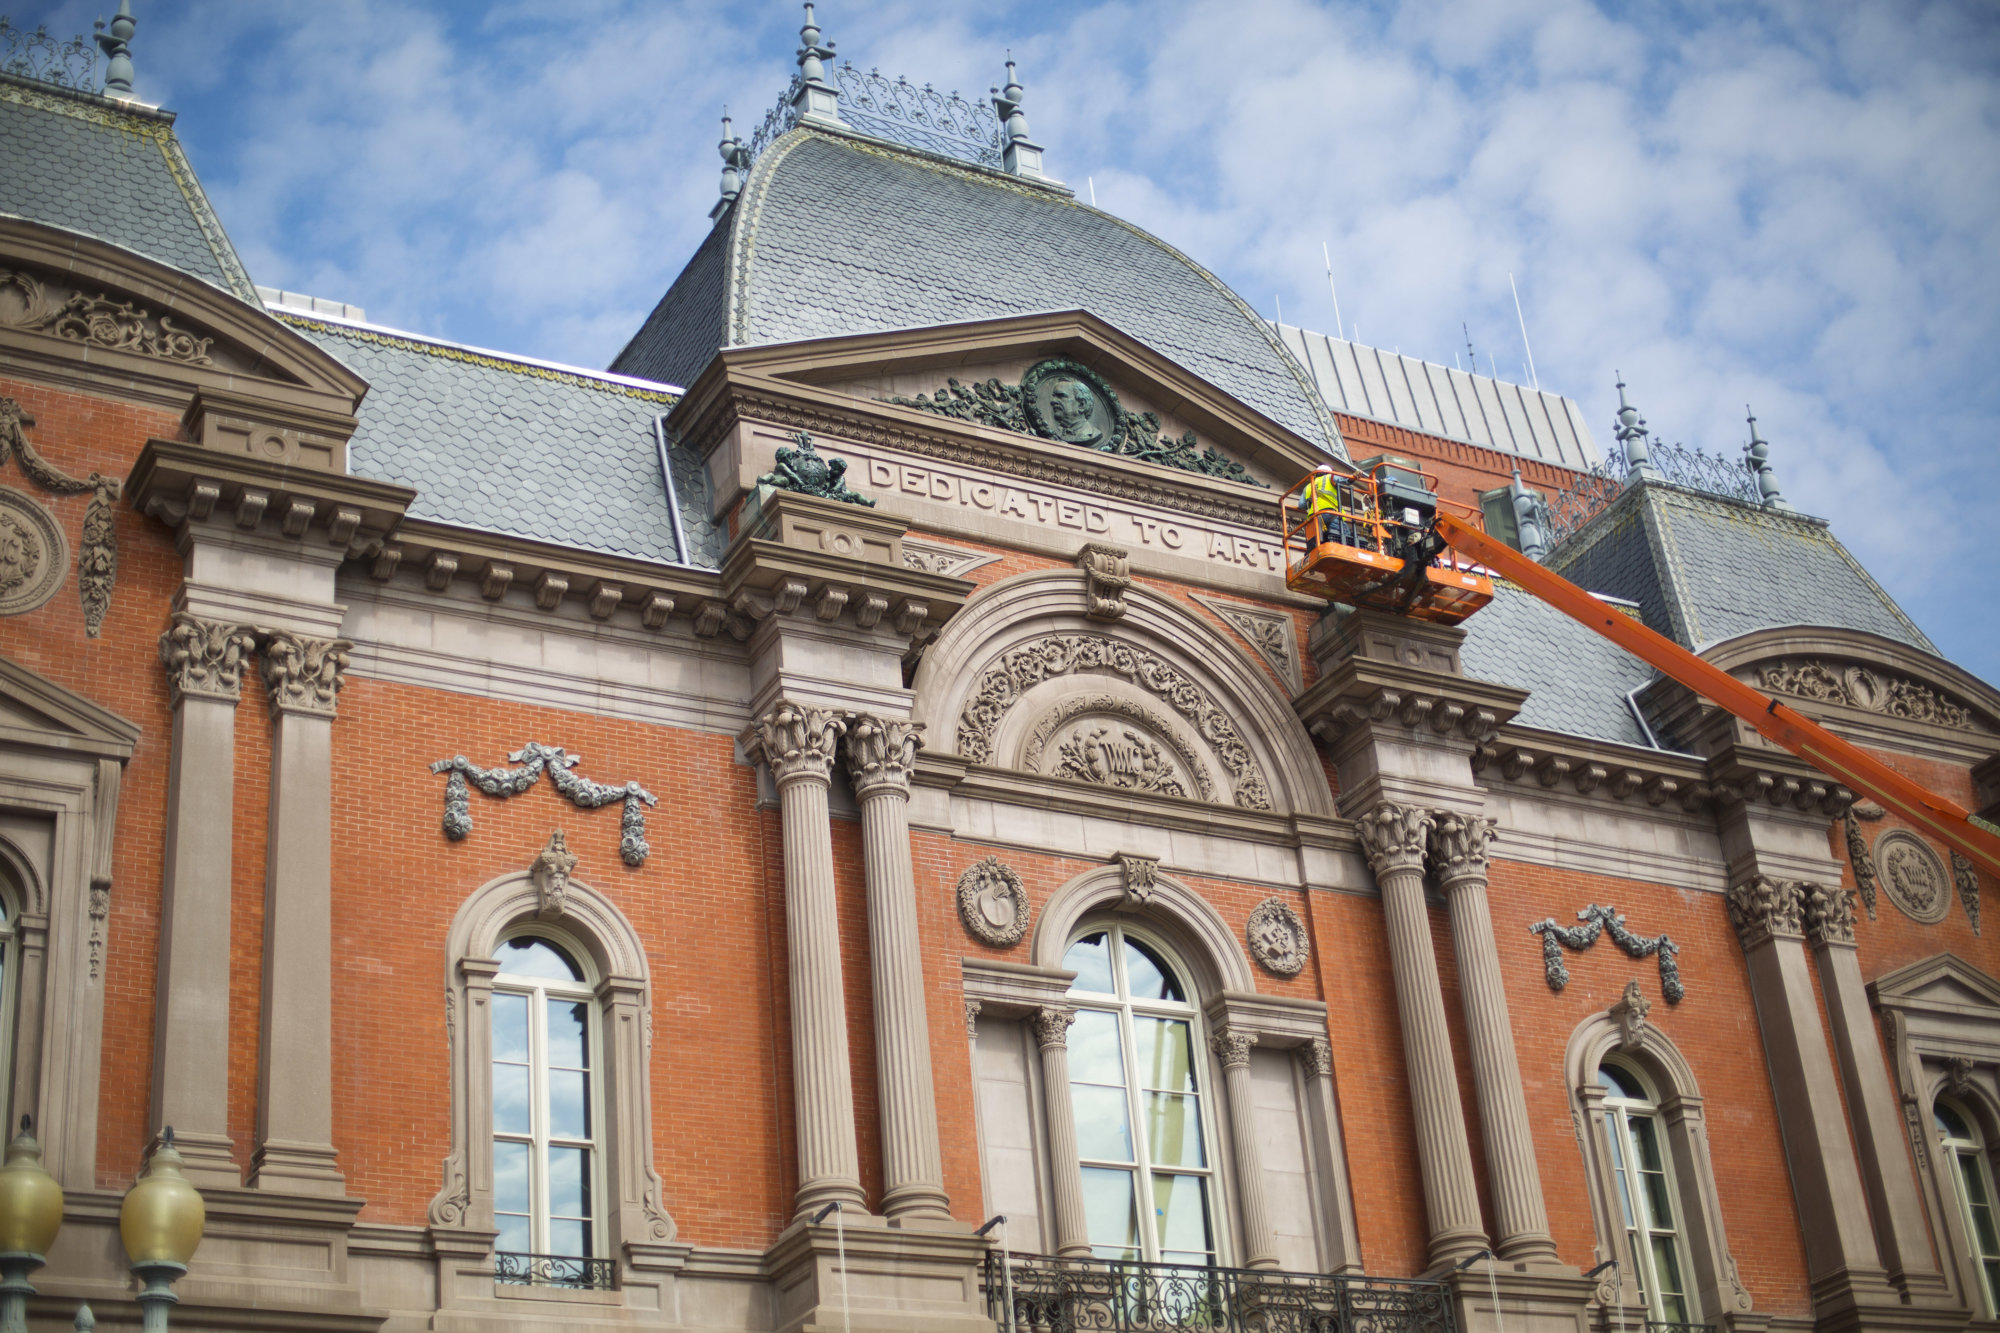 <p><strong>The Renwick Gallery</strong></p>
<p>When The Renwick Gallery reopened in November 2015, its exhibits quickly flooded the Instagram feeds of many Washingtonians … and it hasn&#8217;t stopped. The contemporary craft and art museum is one of the many Smithsonian museums in D.C. It&#8217;s interactive, family-friendly, and best of all, free. Current exhibits include <a href="https://americanart.si.edu/exhibitions?museum%5Brenwick%5D=renwick" target="_blank" rel="noopener">a special showing that merges traditional glass sculpture with augmented reality technology</a>.</p>
